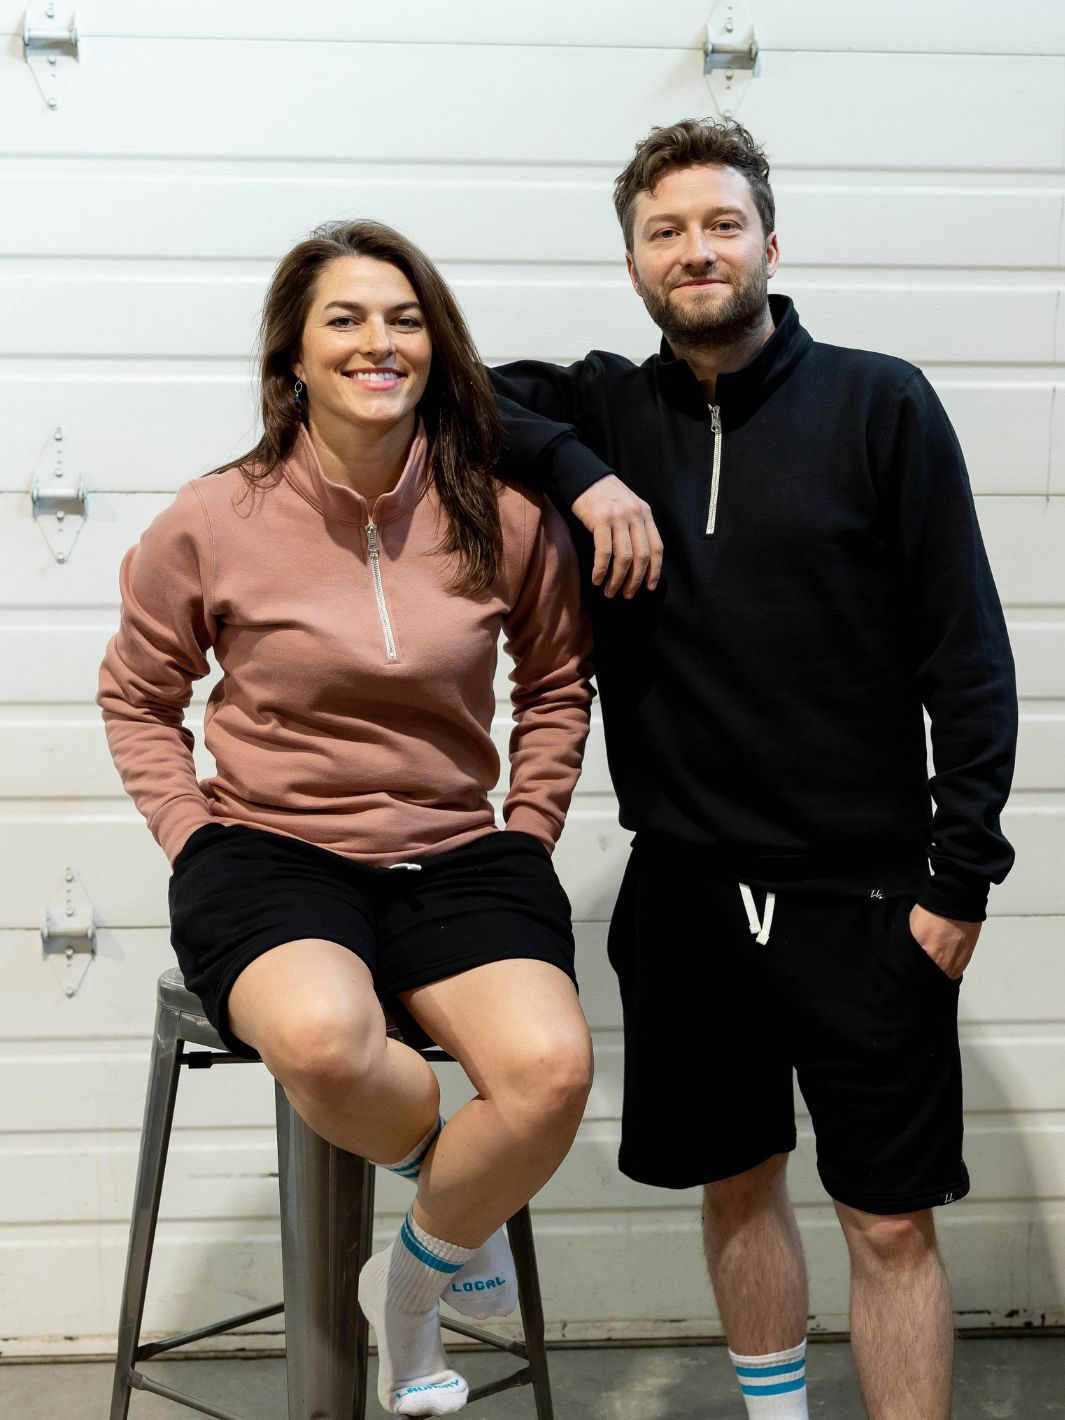 Two individual's showcasing the Local Laundry Greenview 3/4 zip in both black and dusty rose. This garment is made in Canada, and is constructed of a premium blend of 50% cotton and 50% polyester.